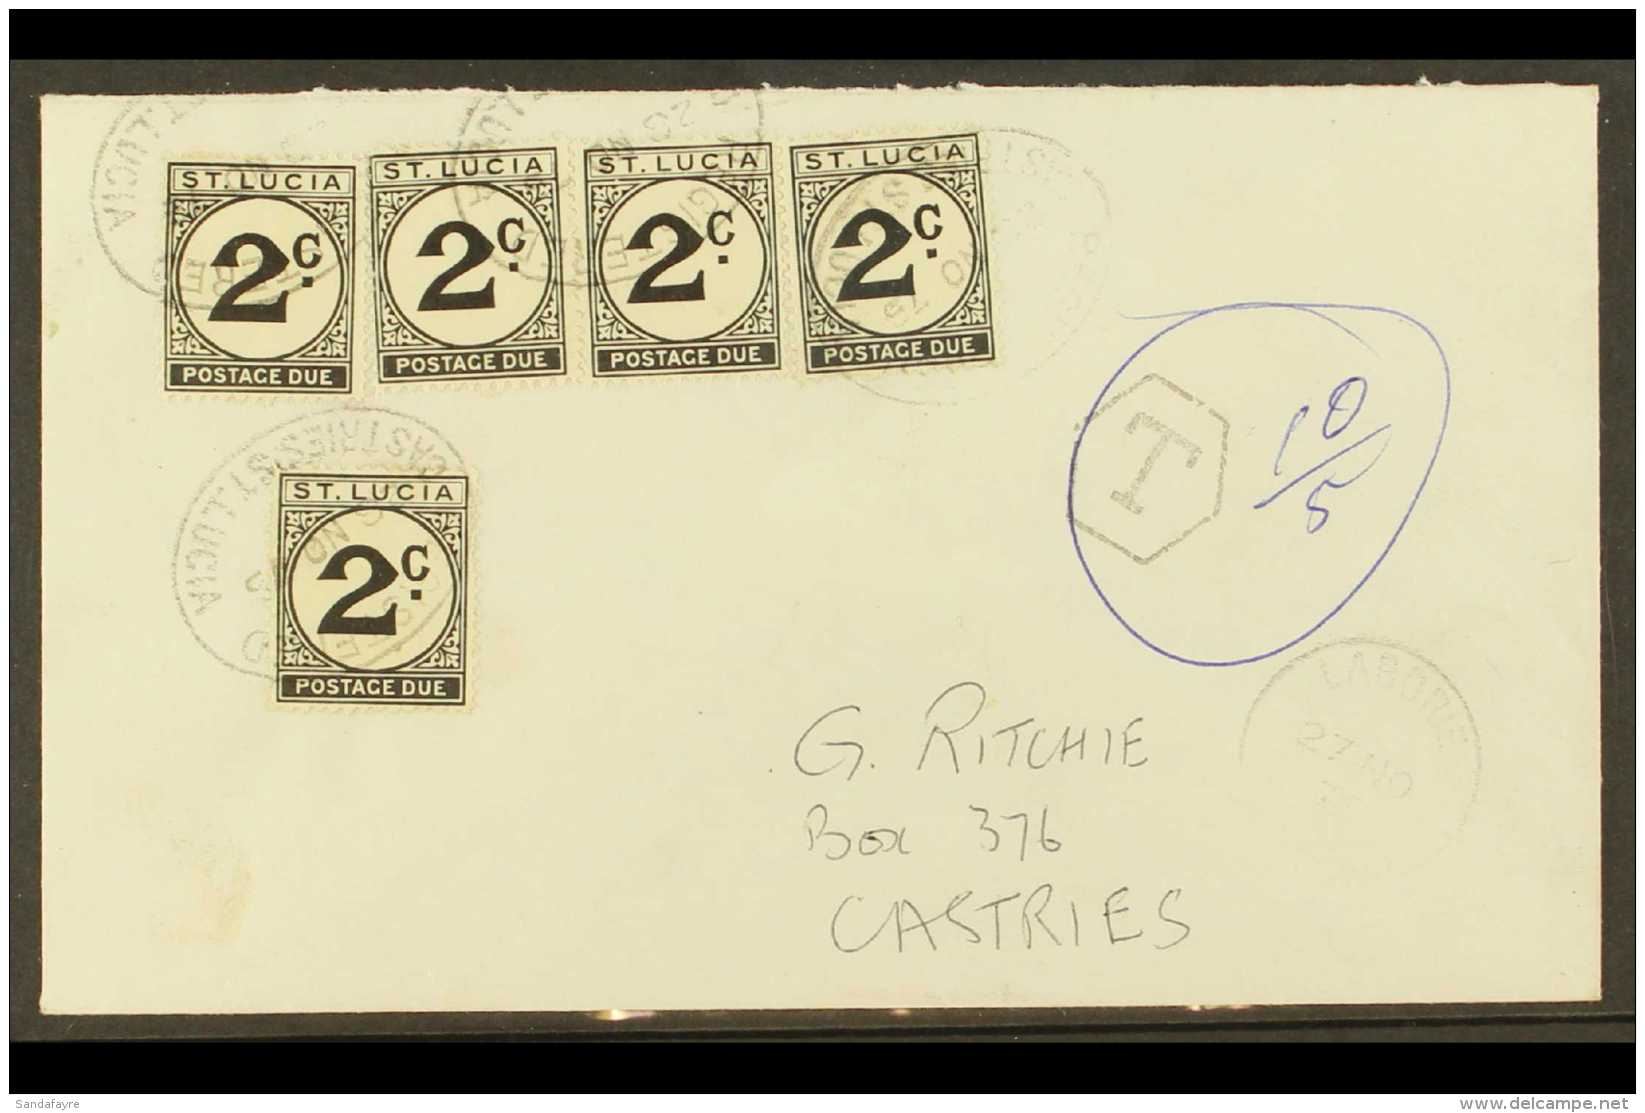 POSTAGE DUE 1975 (23 Nov) Stampless Local Cover Bearing Five 2c Postage Dues Tied Neat "Registered/Castries St... - St.Lucia (...-1978)